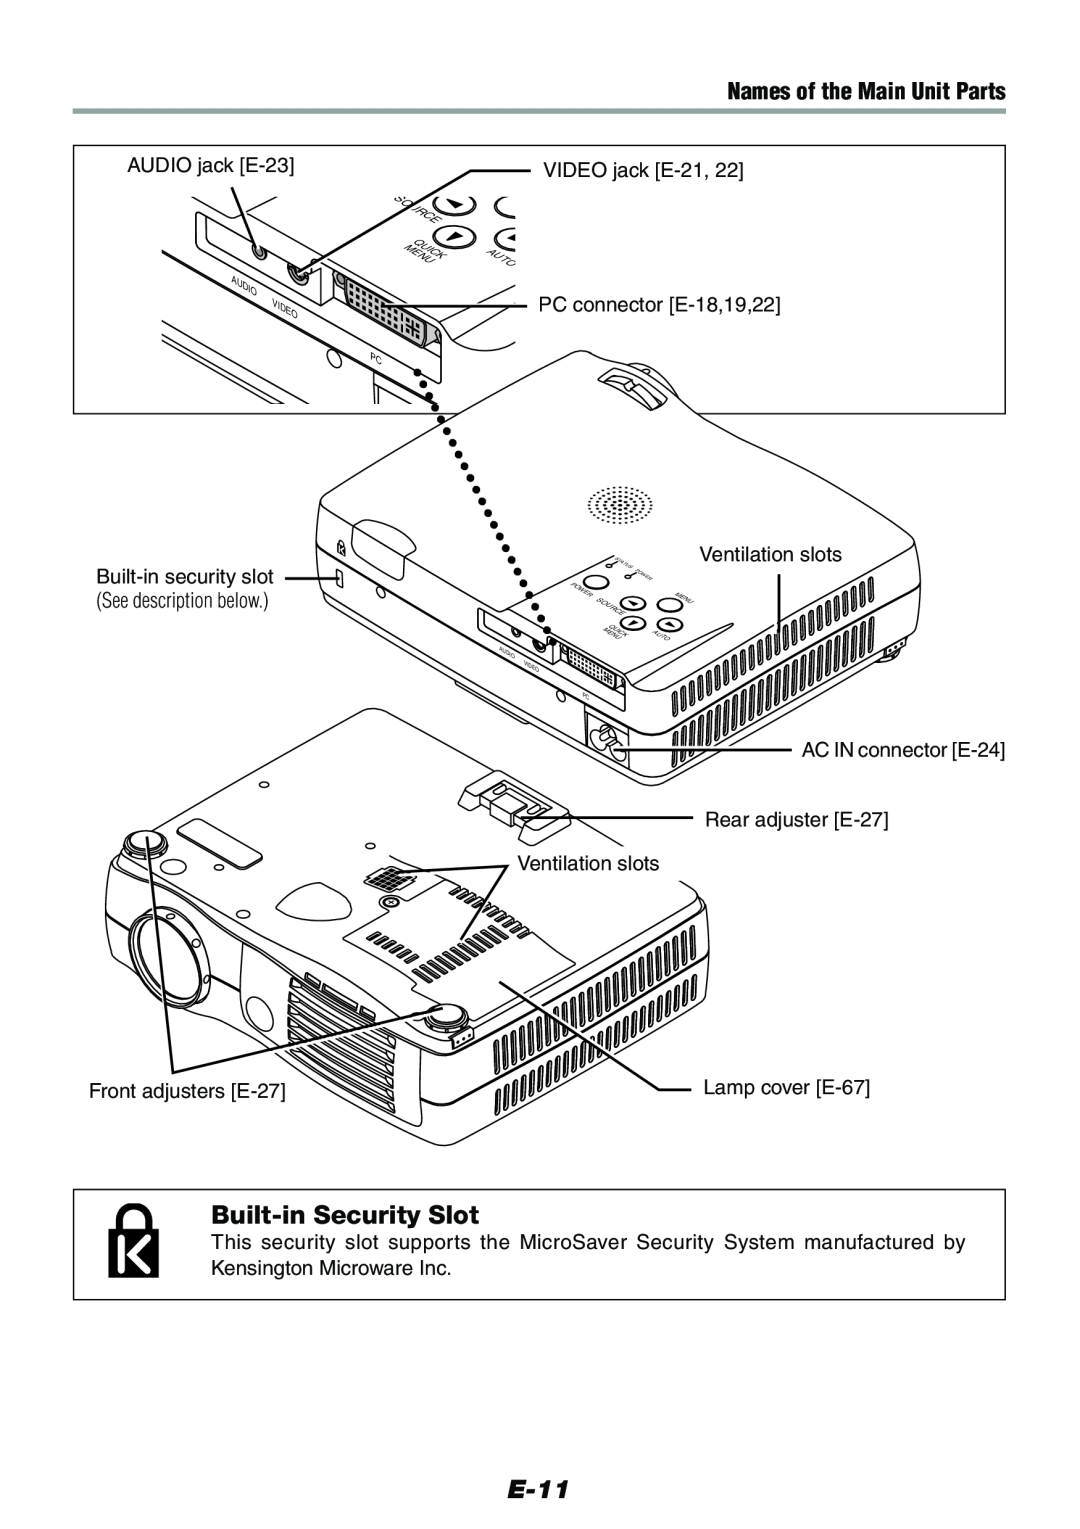 Epson V-1100 user manual Built-inSecurity Slot, E-11, Names of the Main Unit Parts 